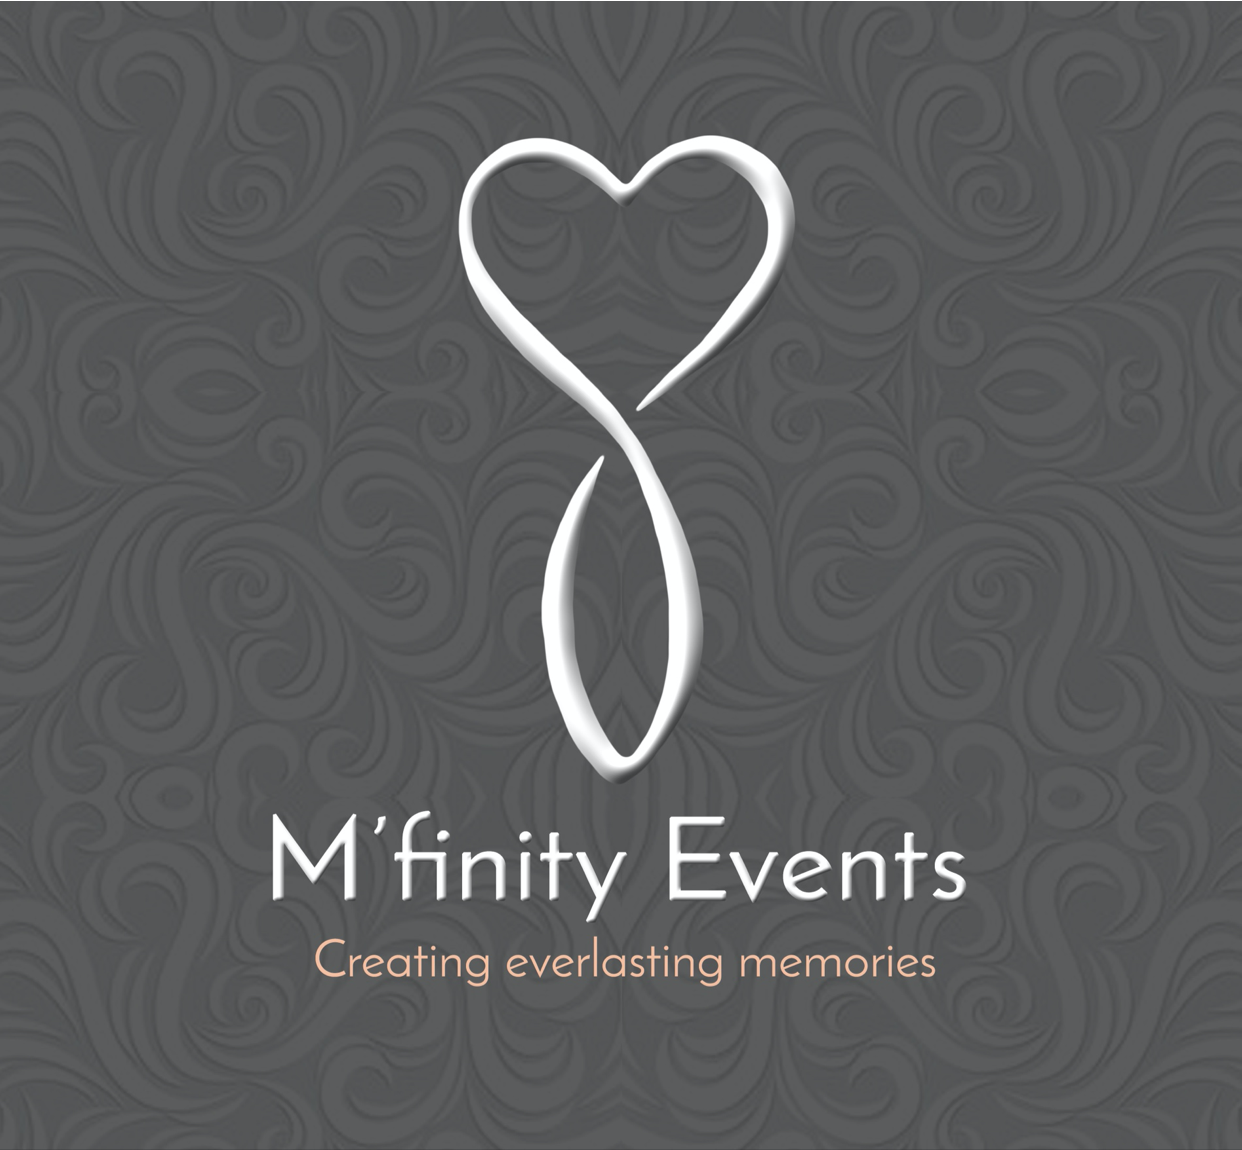 M'finity Events